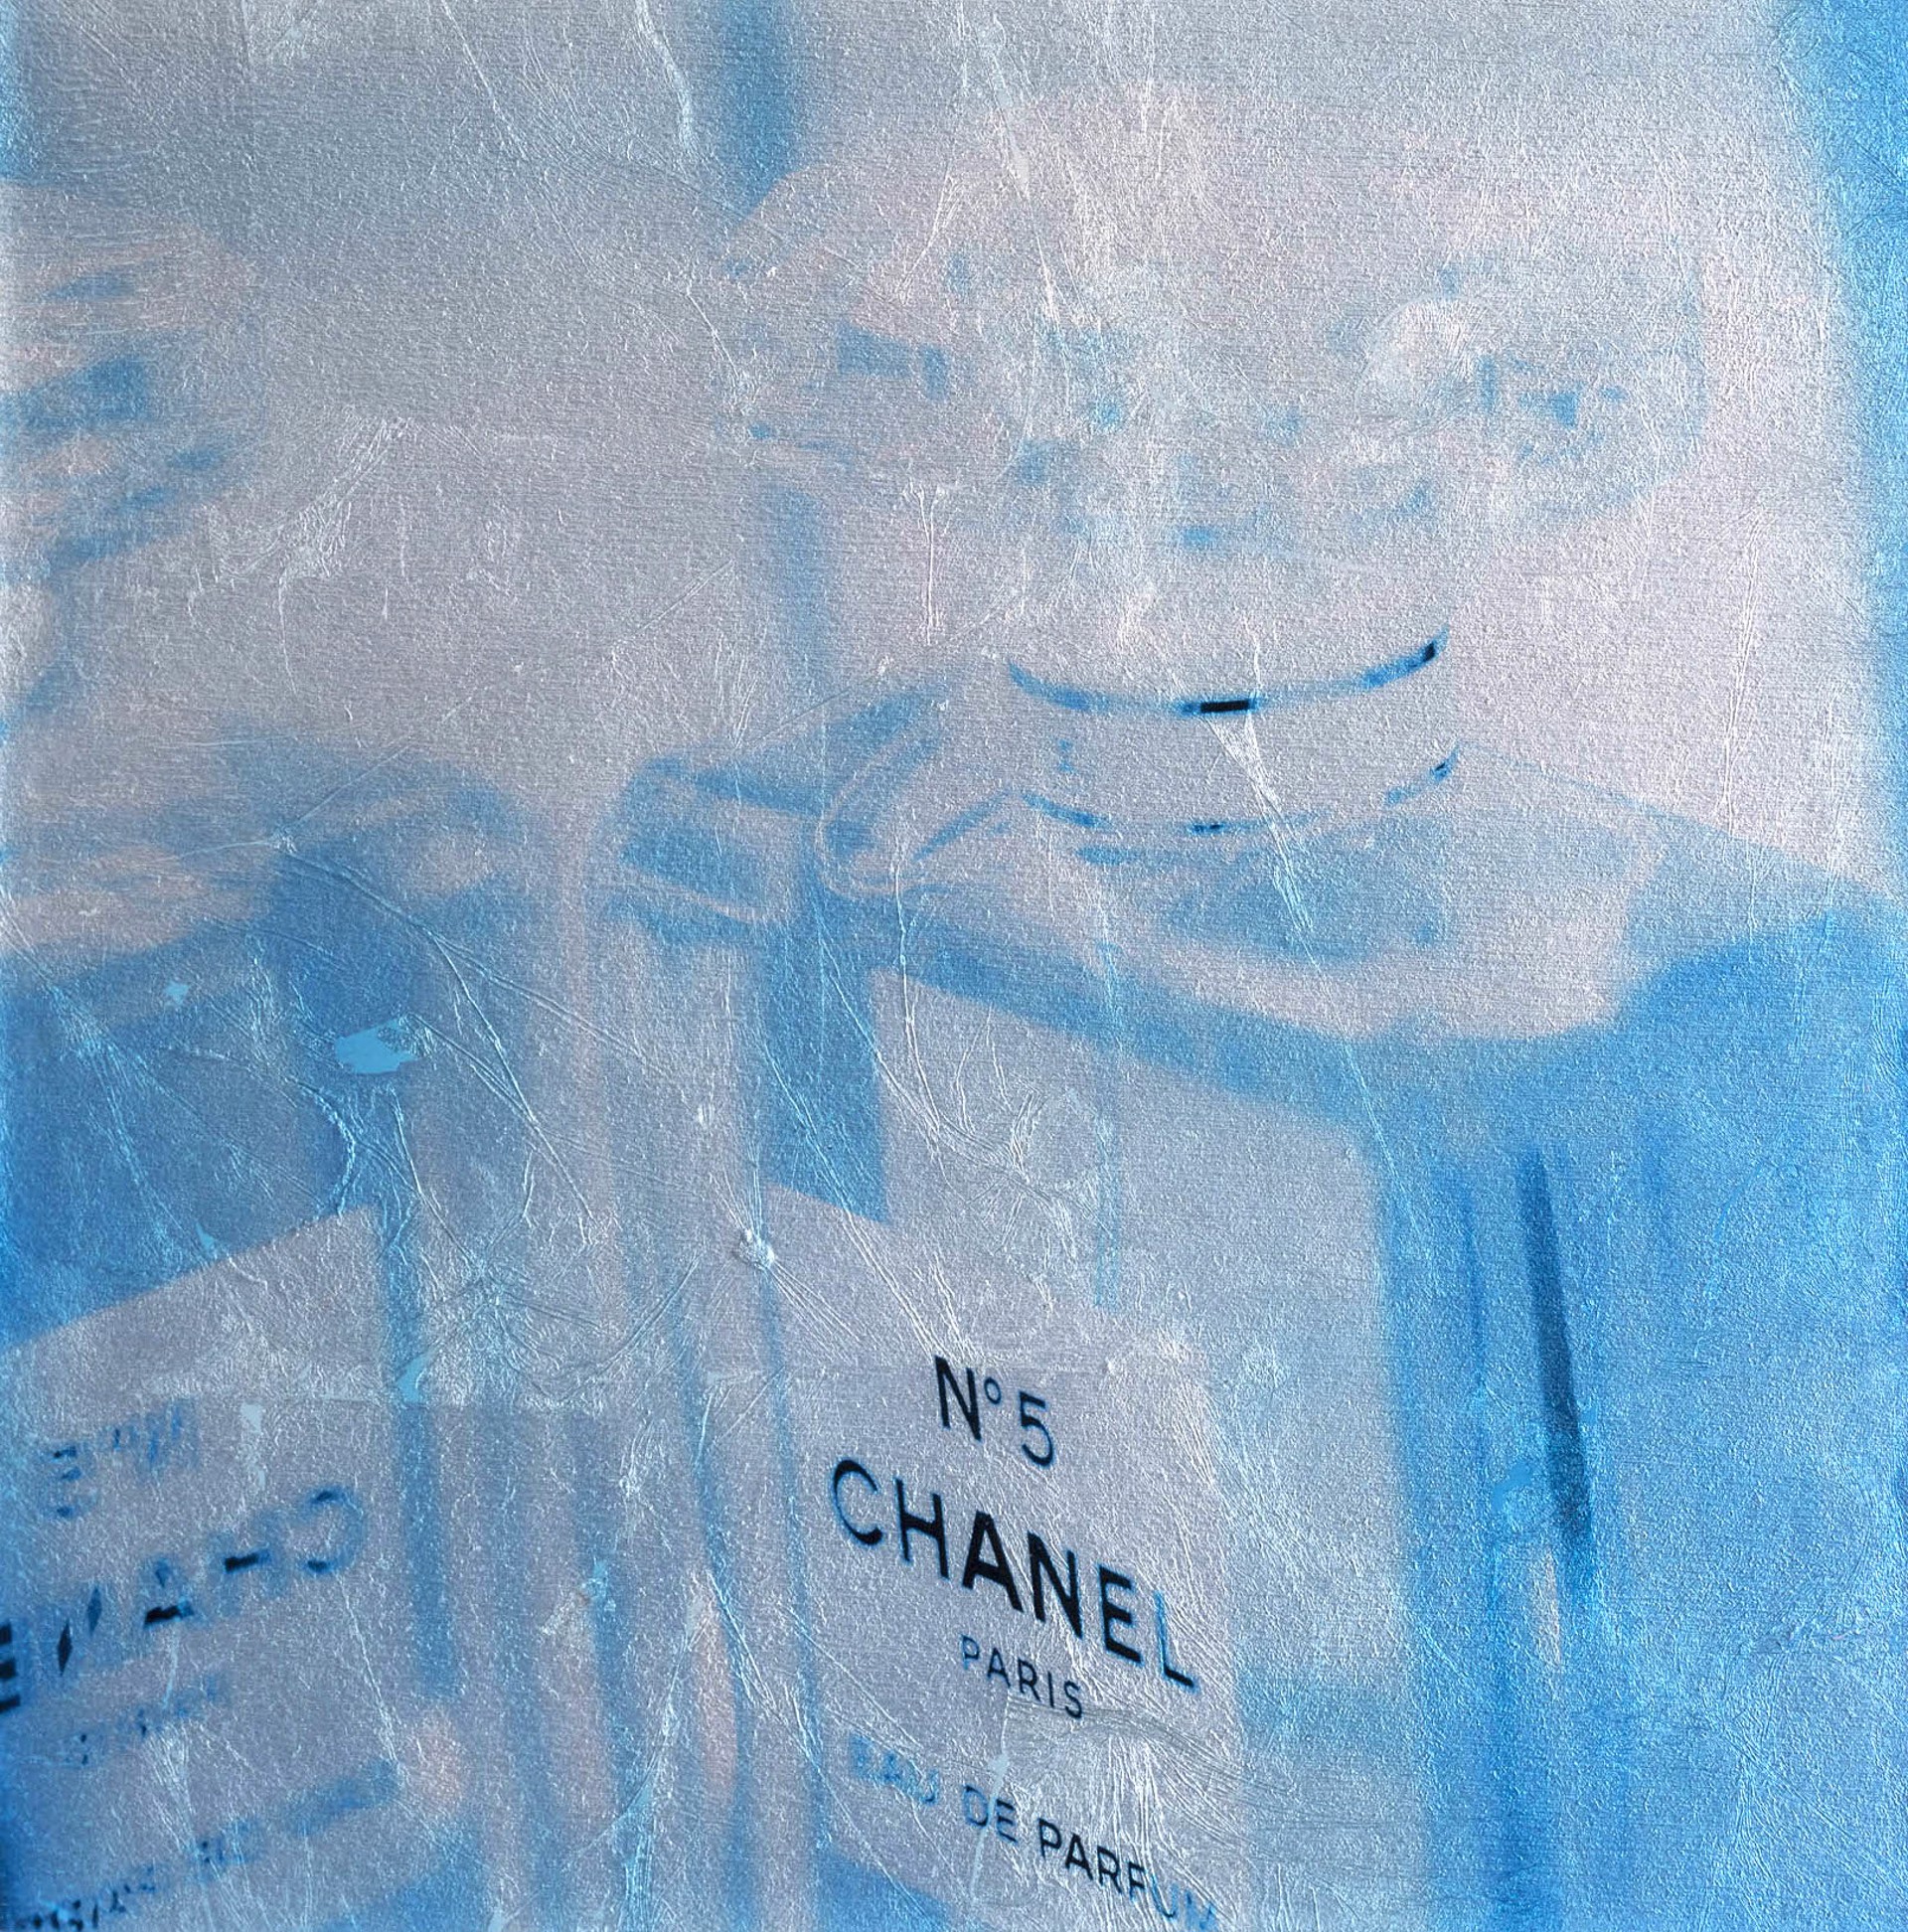 Coco Chanel Series: 14 by Mark Jackson